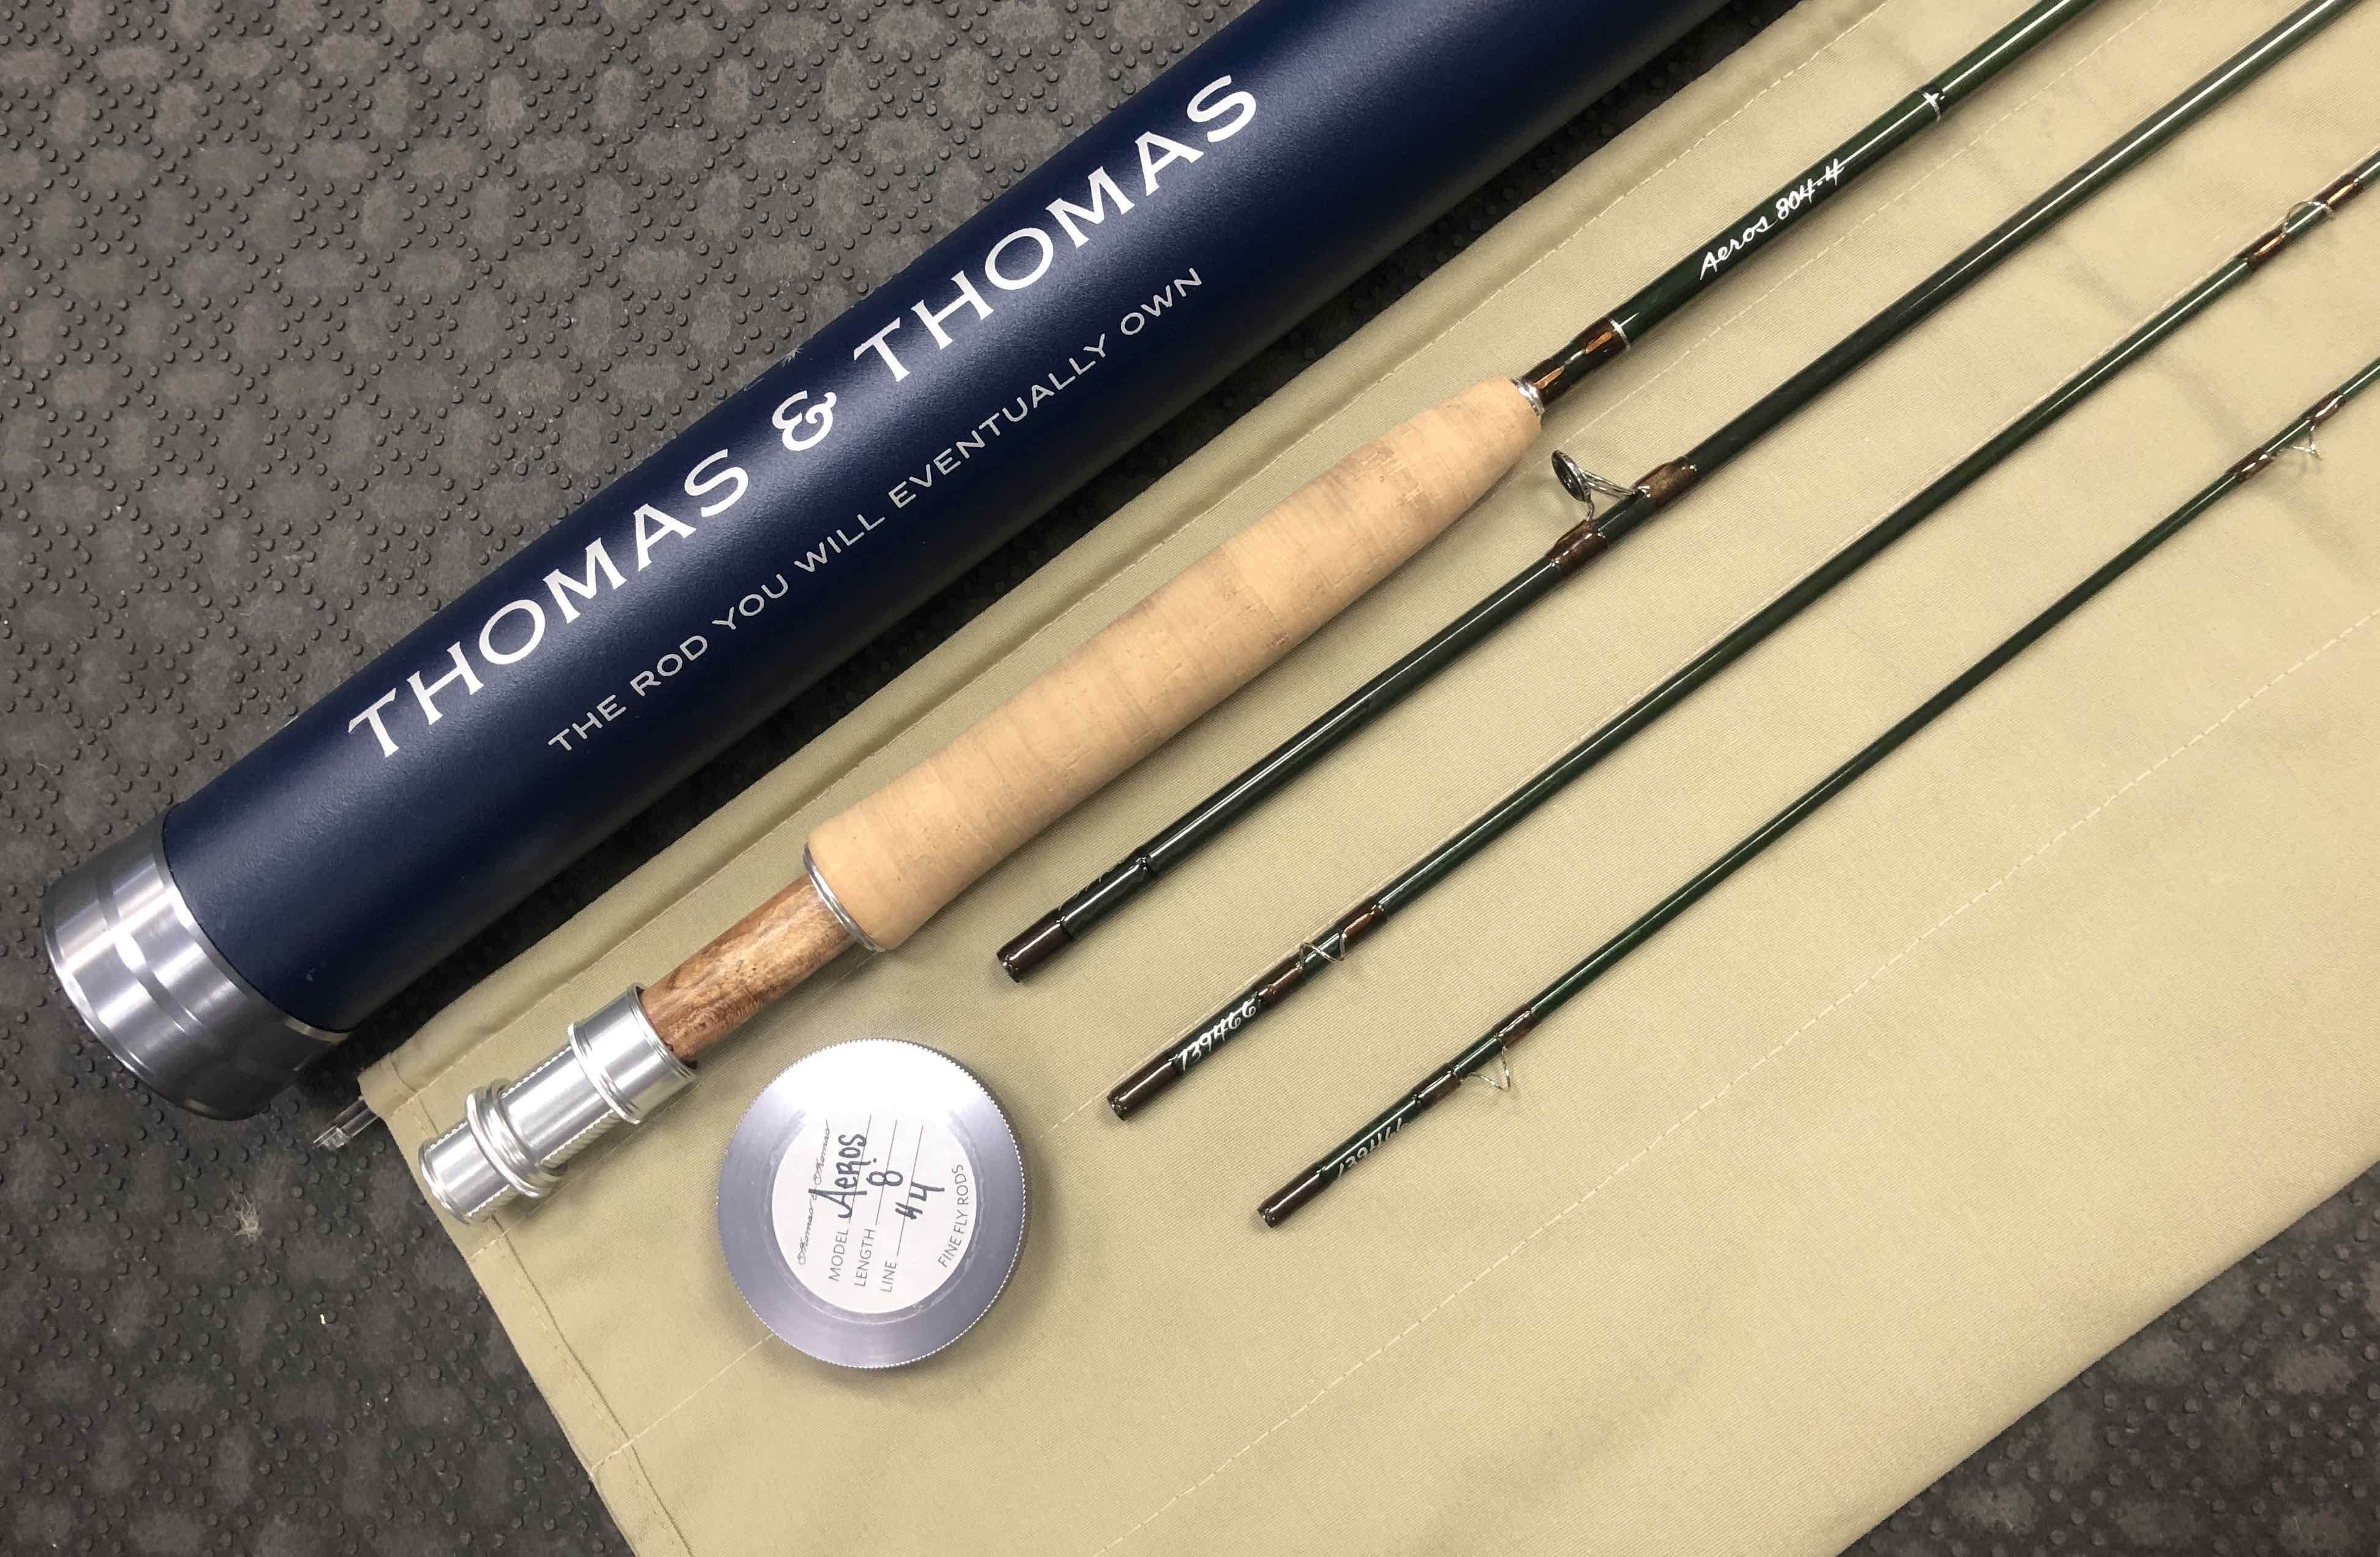 https://thefirstcast.ca/wp-content/uploads/2019/06/Thomas-and-Thomas-Aeros-8foot-4piece-4weight-Fly-Rod-8044AA.jpg